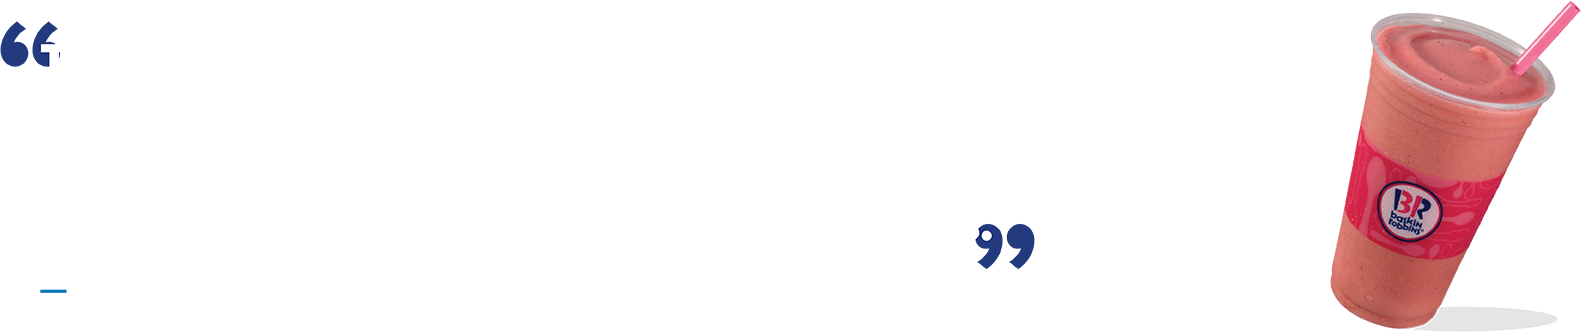 The unveiling of our next generation store is a key milestone in Baskin-Robbins’ nearly 75-year history and we’re so excited to give our guests a new and modernized experience when they visit Baskin-Robbins.